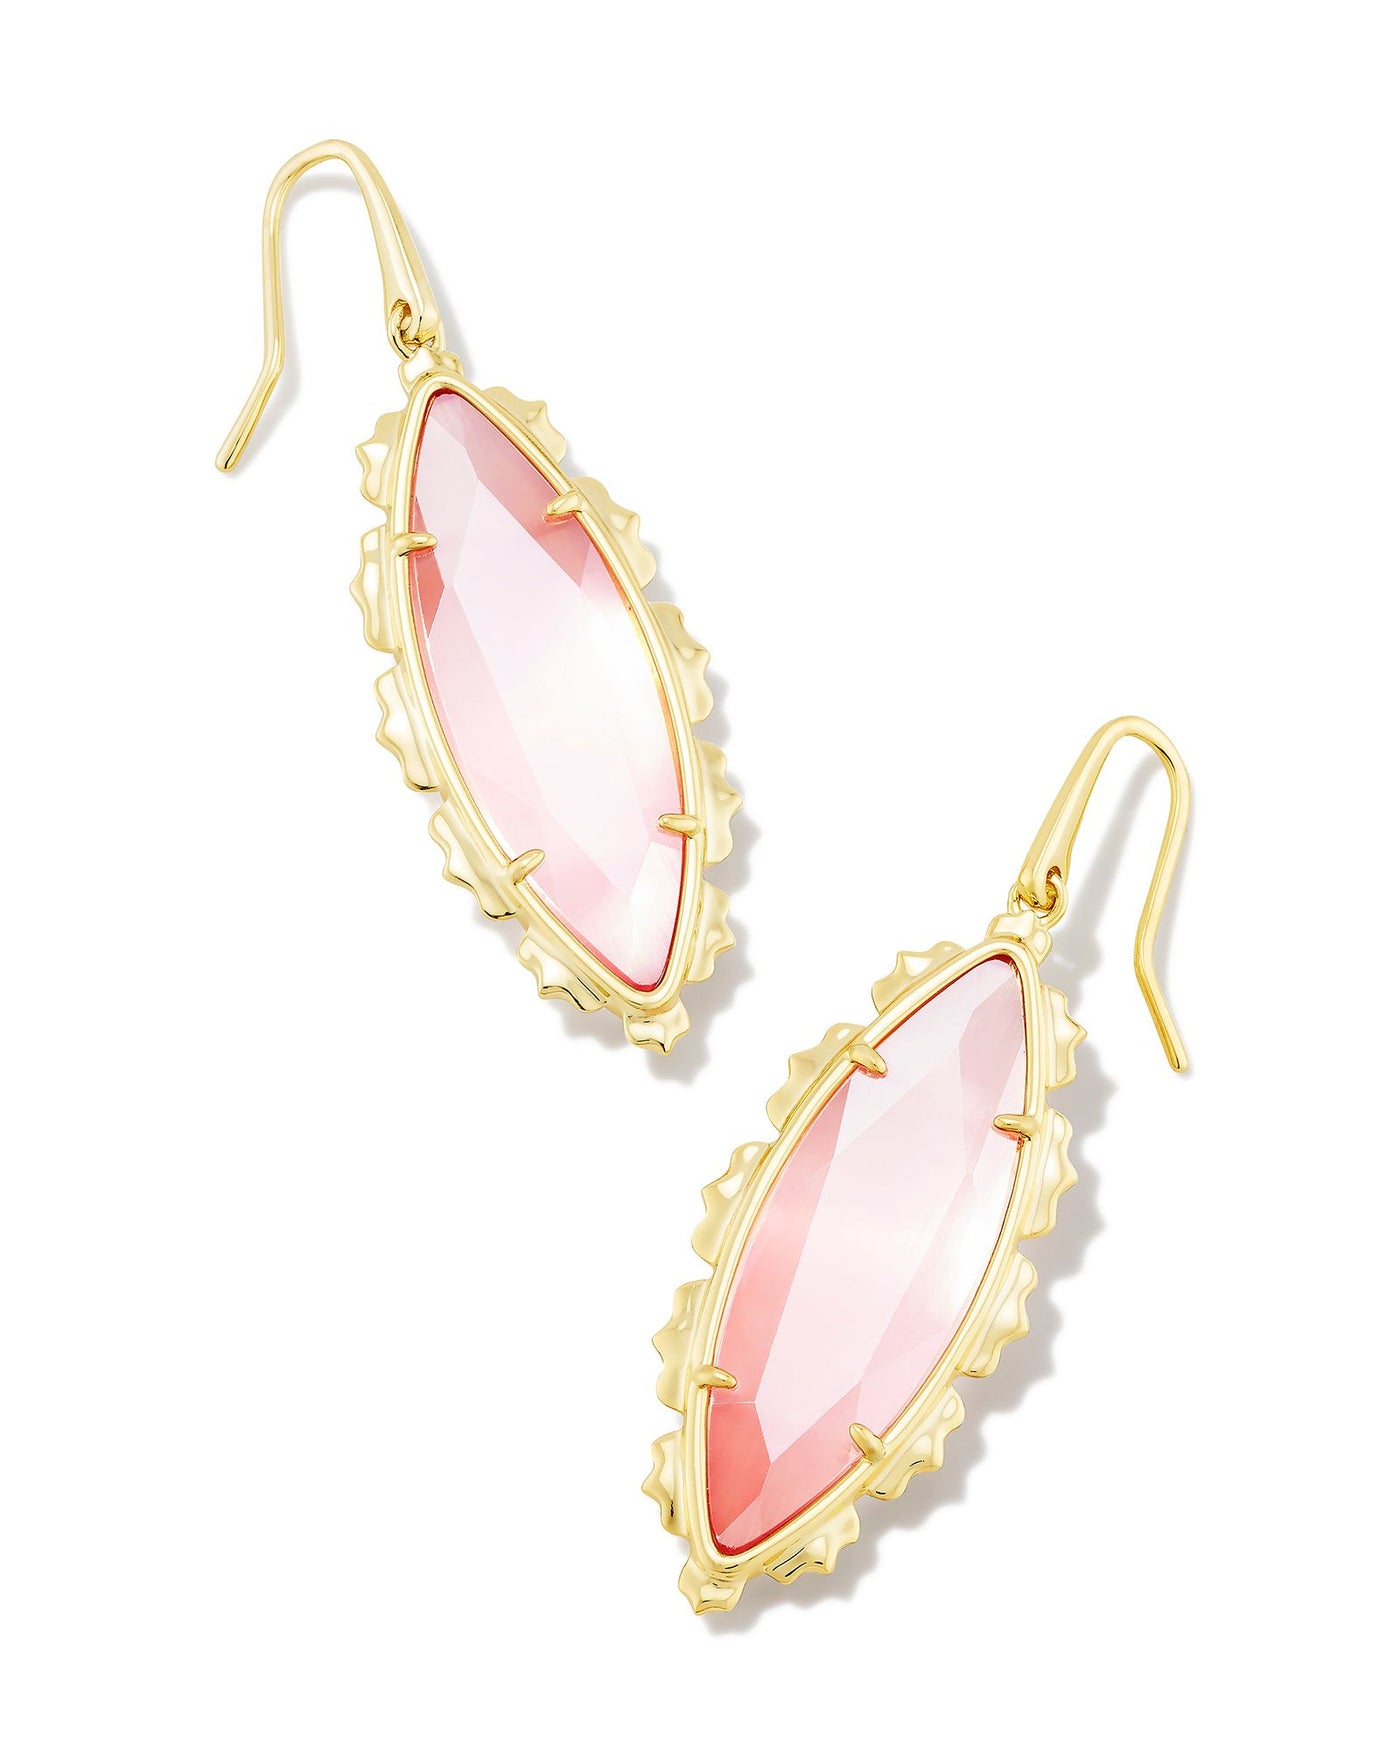 Kendra Scott Genevieve Drop Earrings Gold-Earrings-Kendra Scott-Market Street Nest, Fashionable Clothing, Shoes and Home Décor Located in Mabank, TX